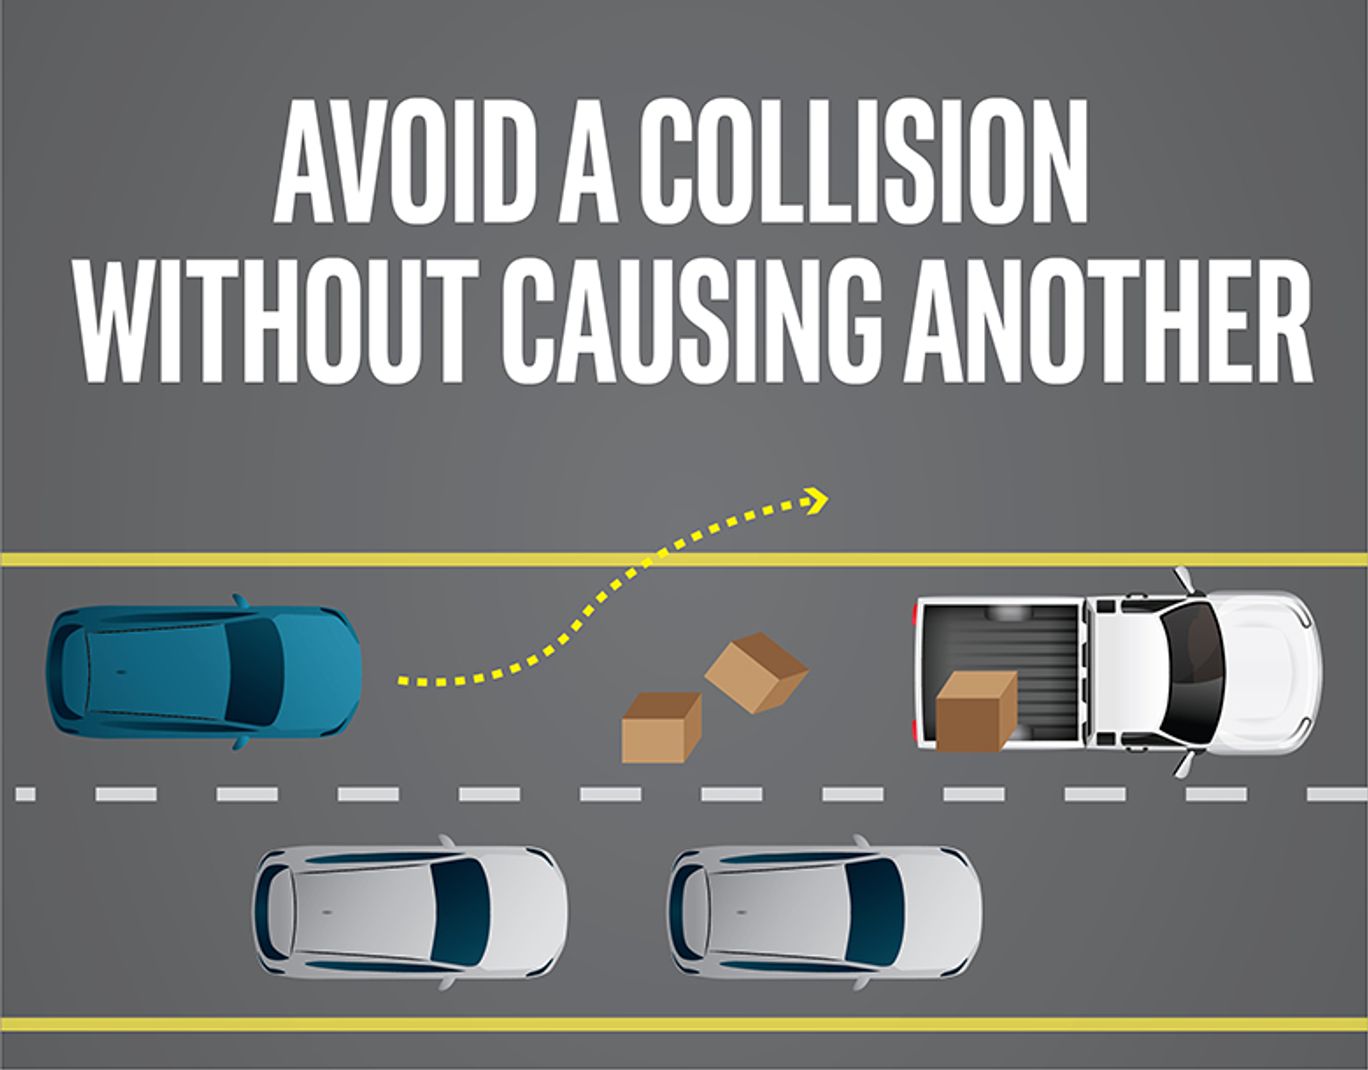 Avoid a collision without causing another